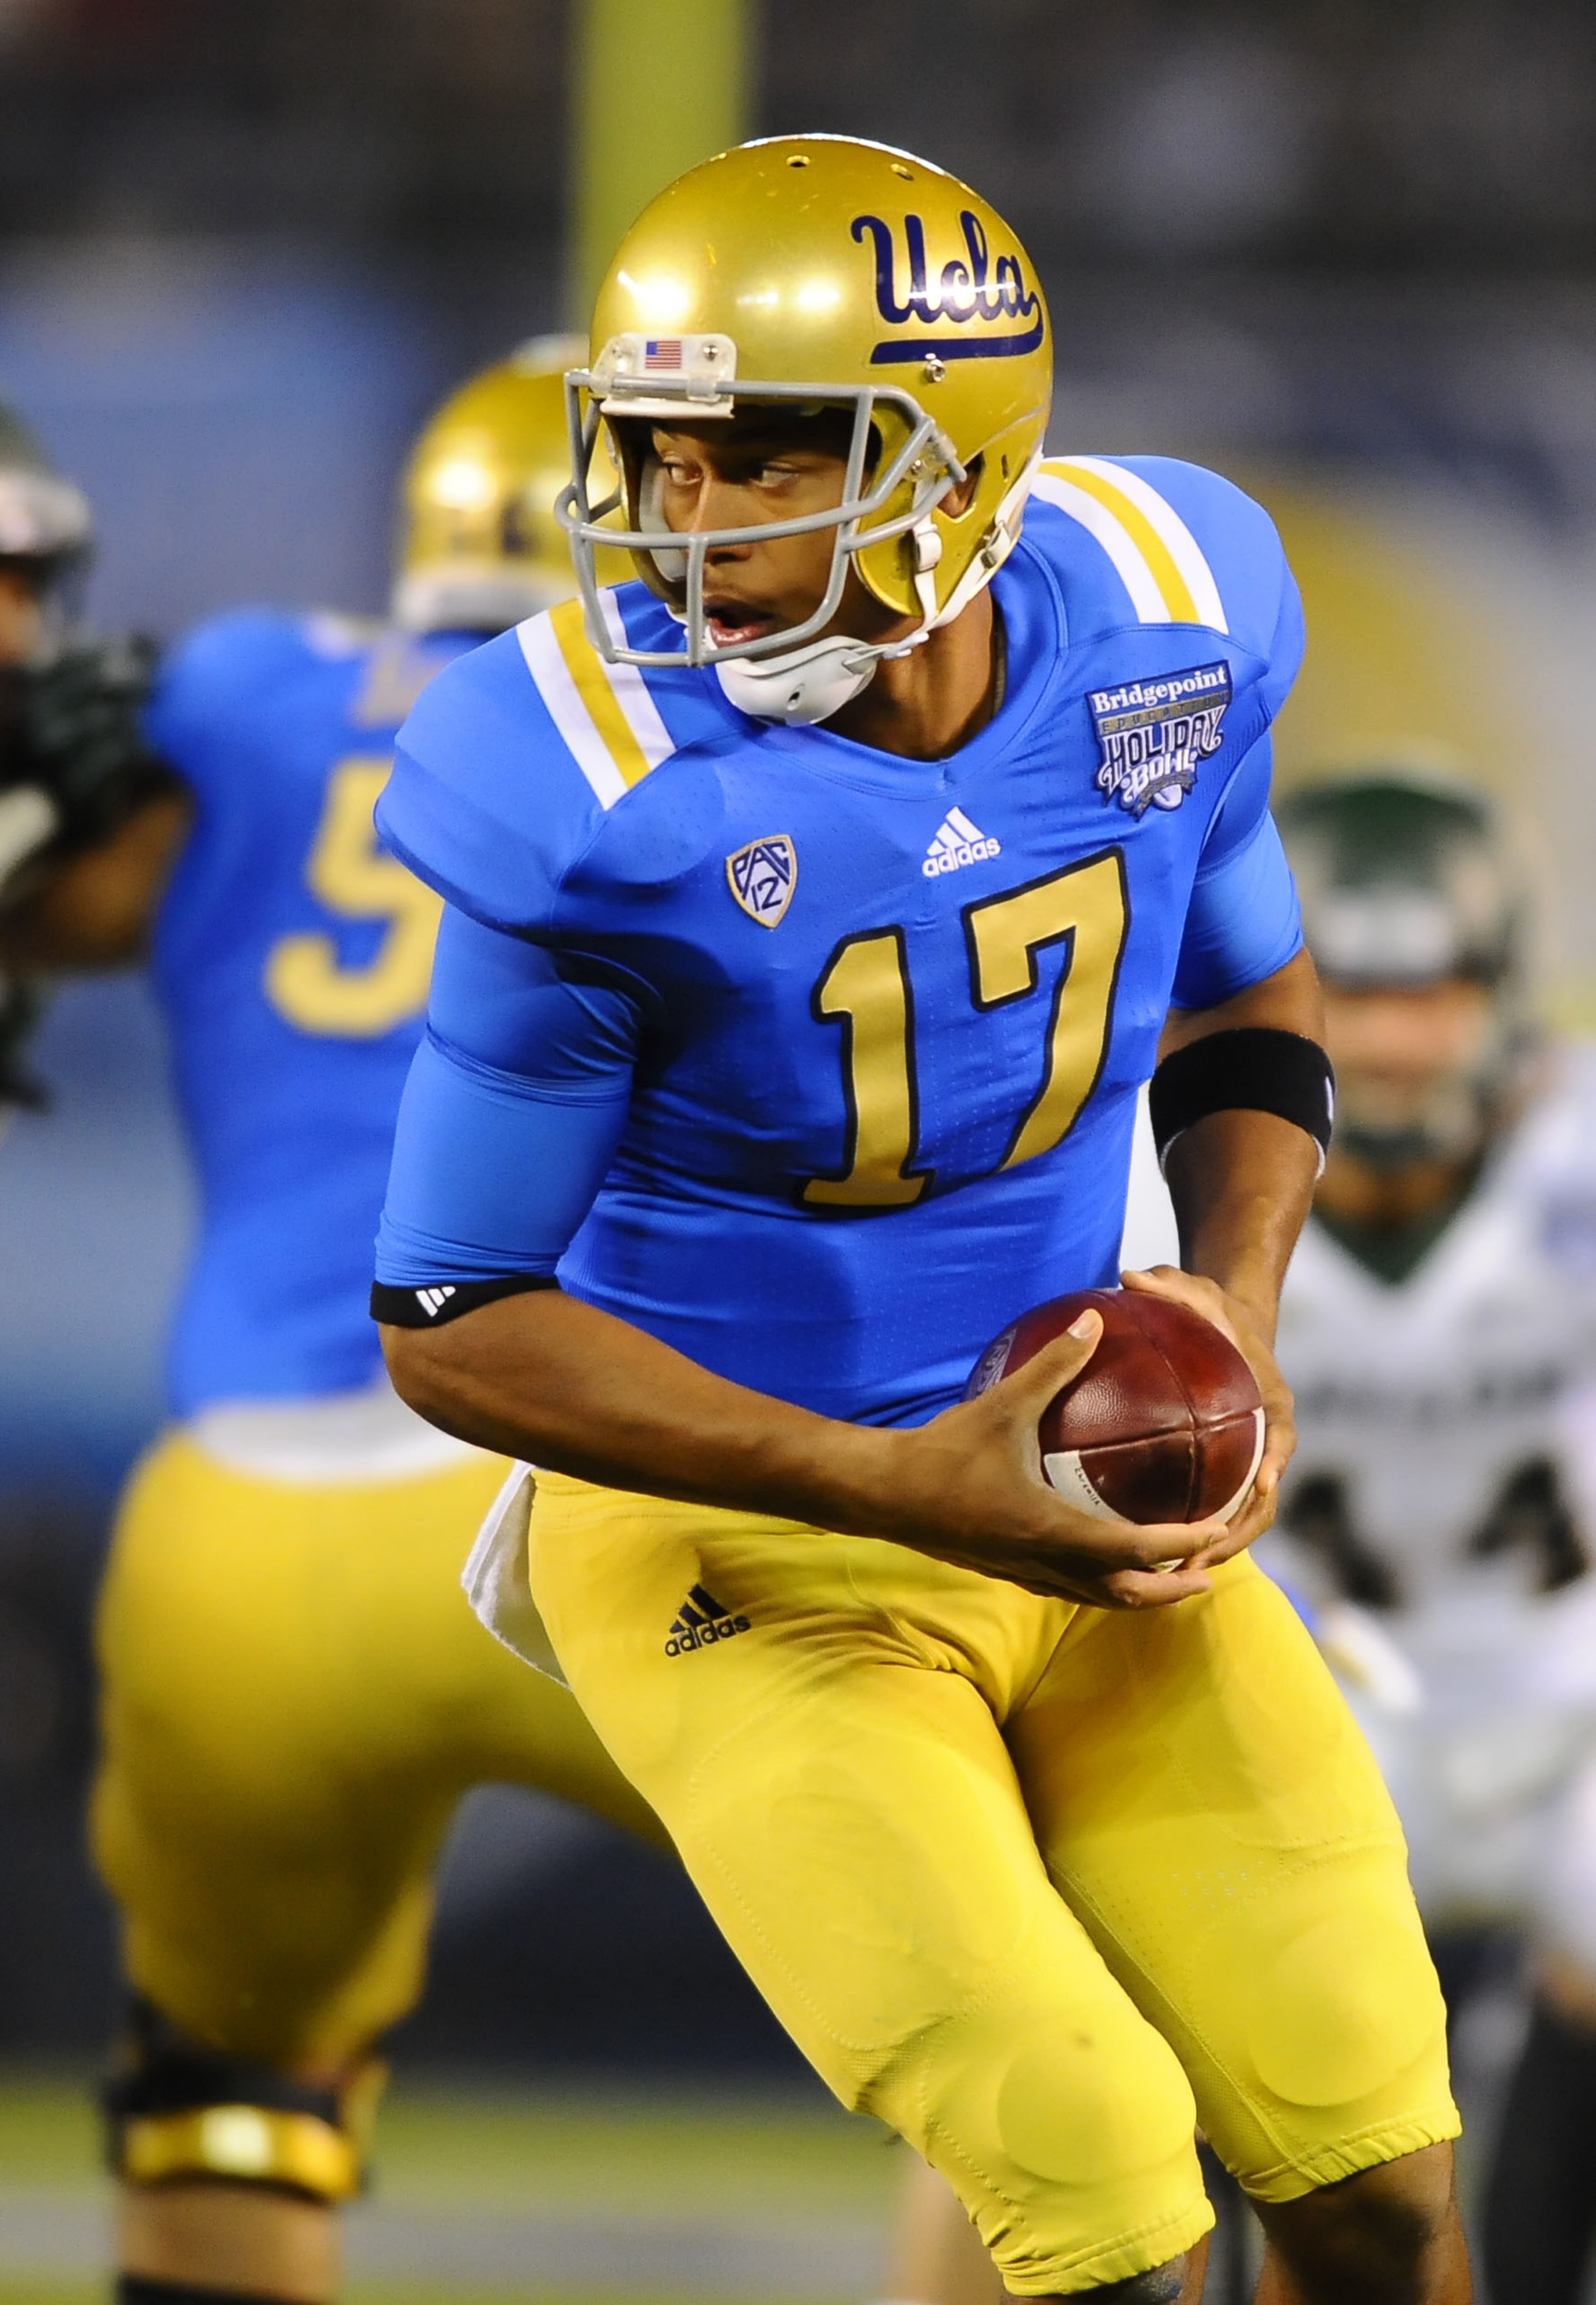 Brett Hundley will lead the Bruins out to practice twice today